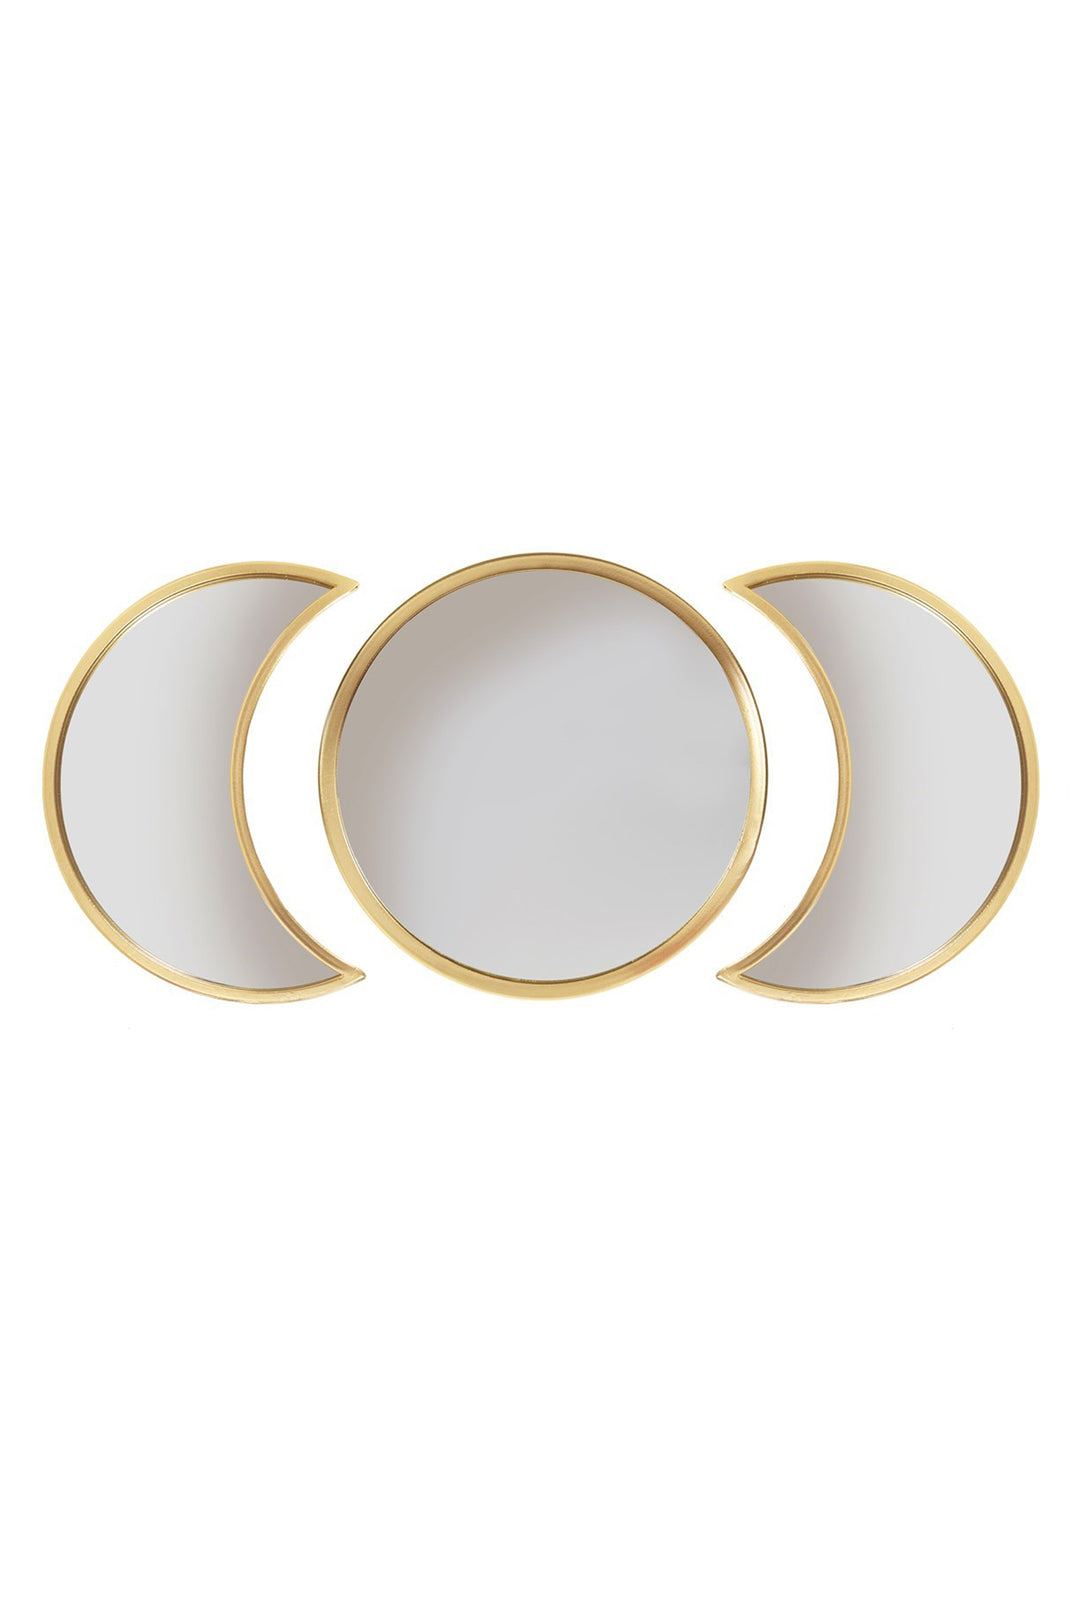 Moon Phases Gold Mirror (set of 3)